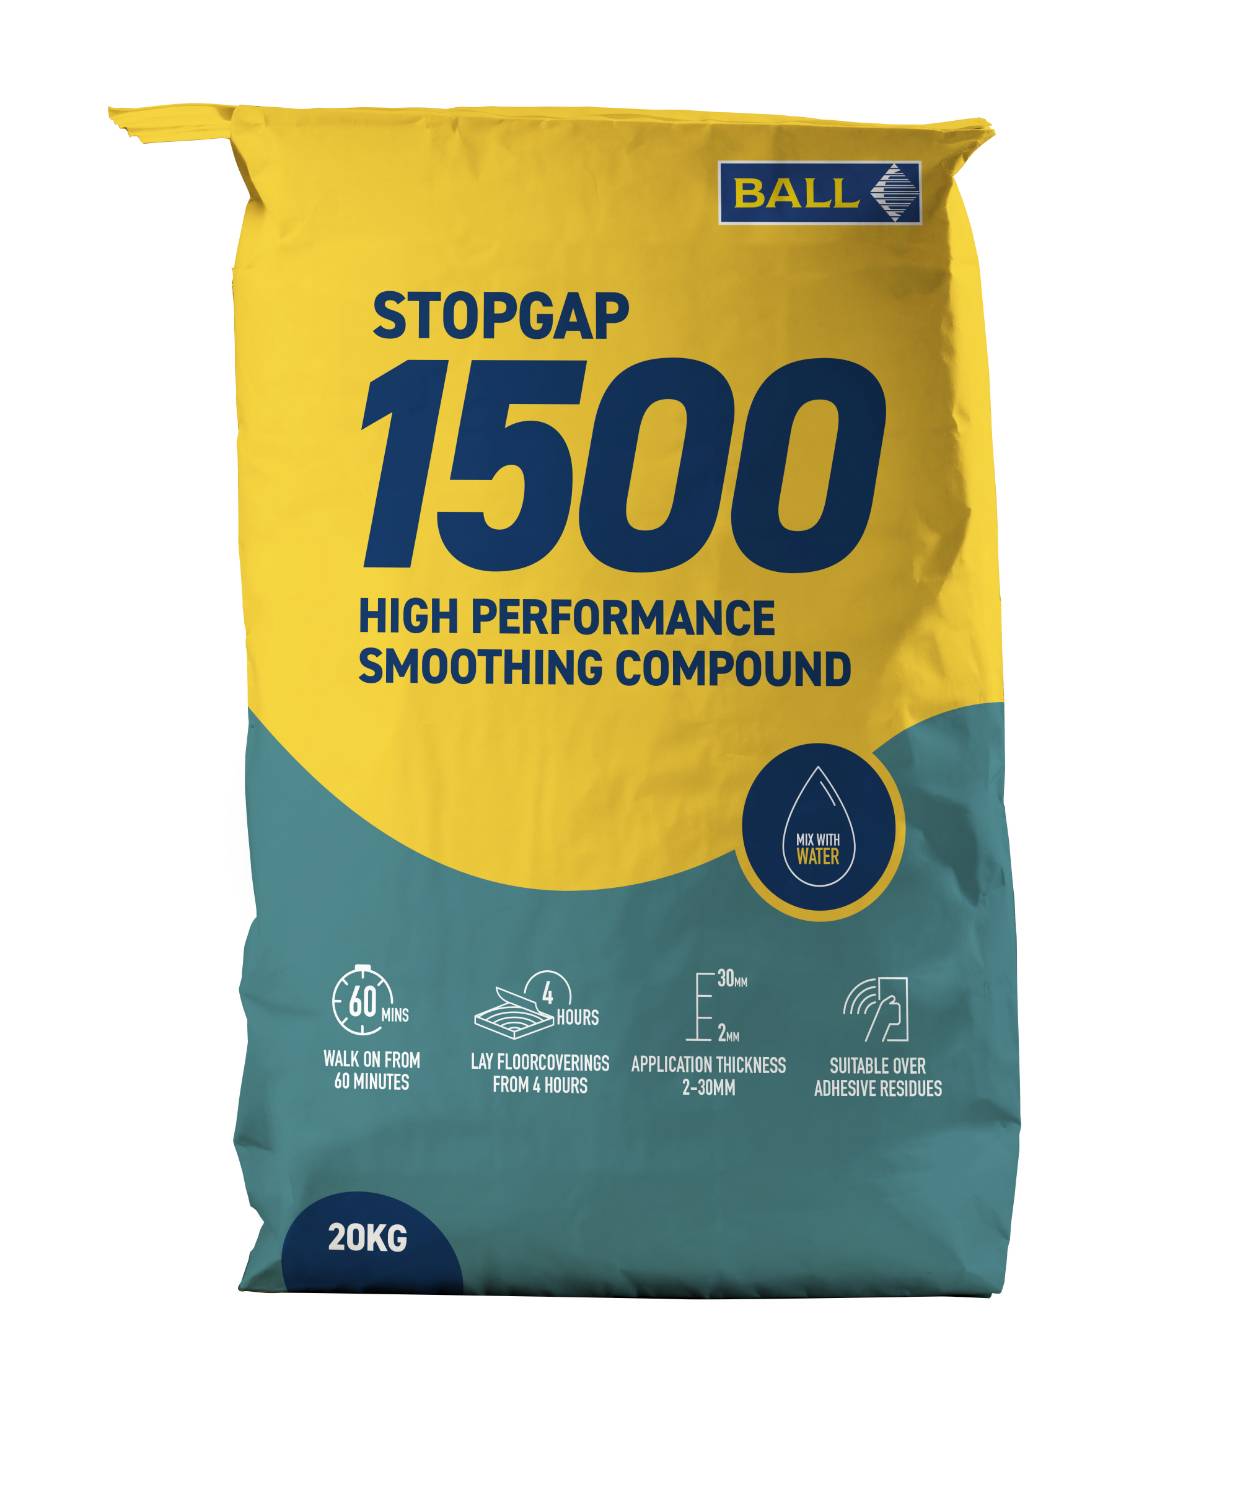 Stopgap 1500 - Smoothing Compound